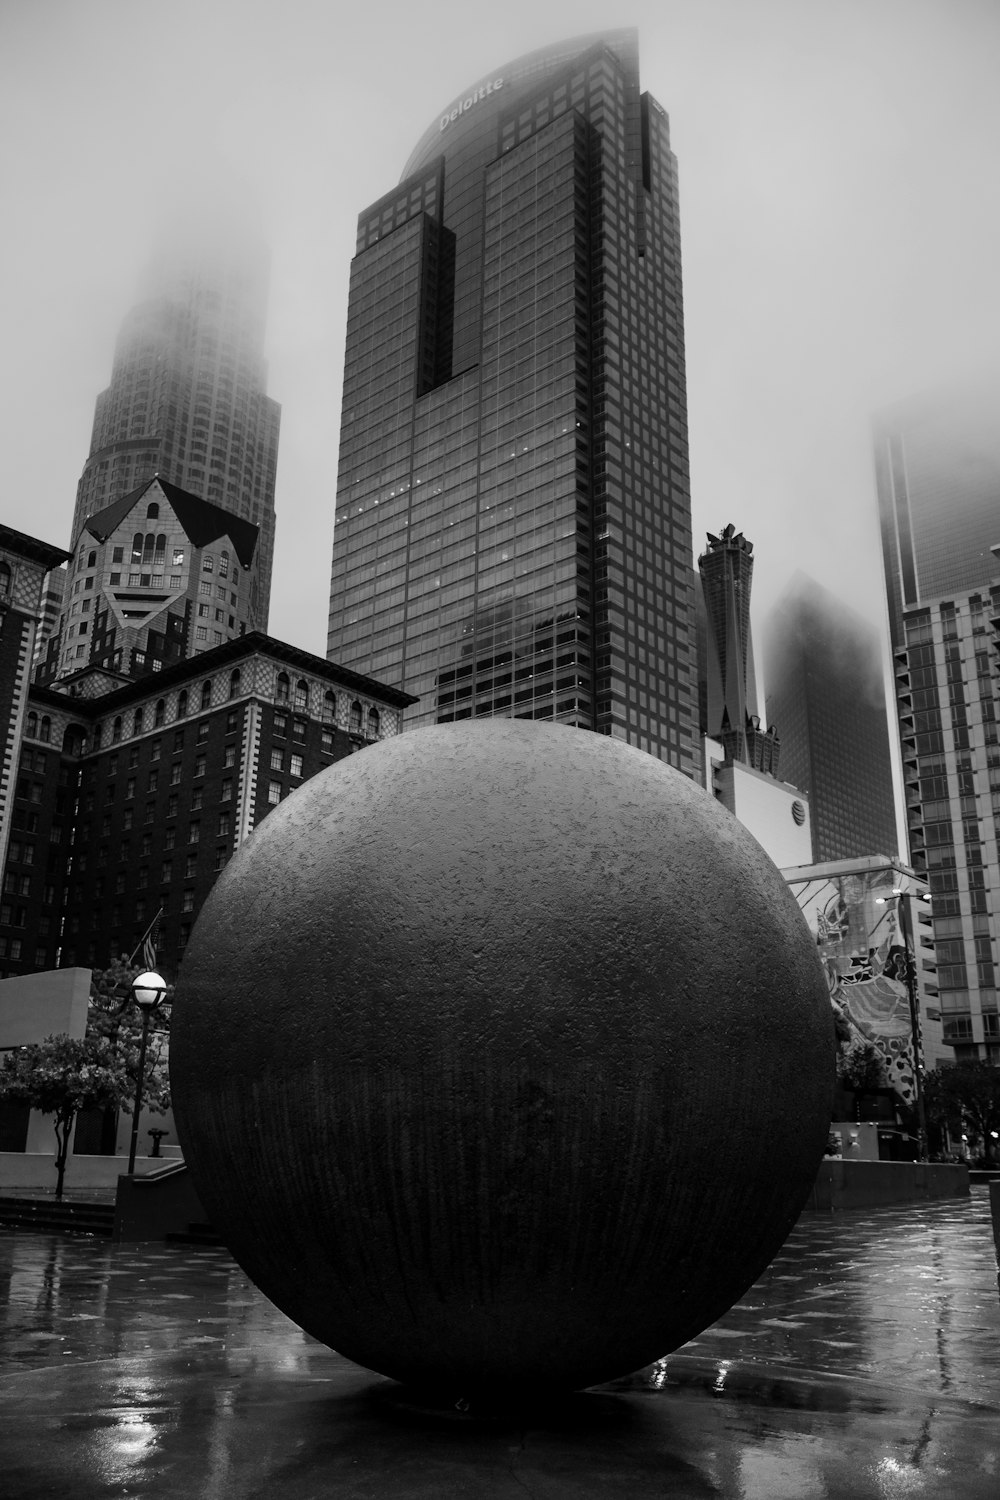 a black and white photo of a large ball in the middle of a city